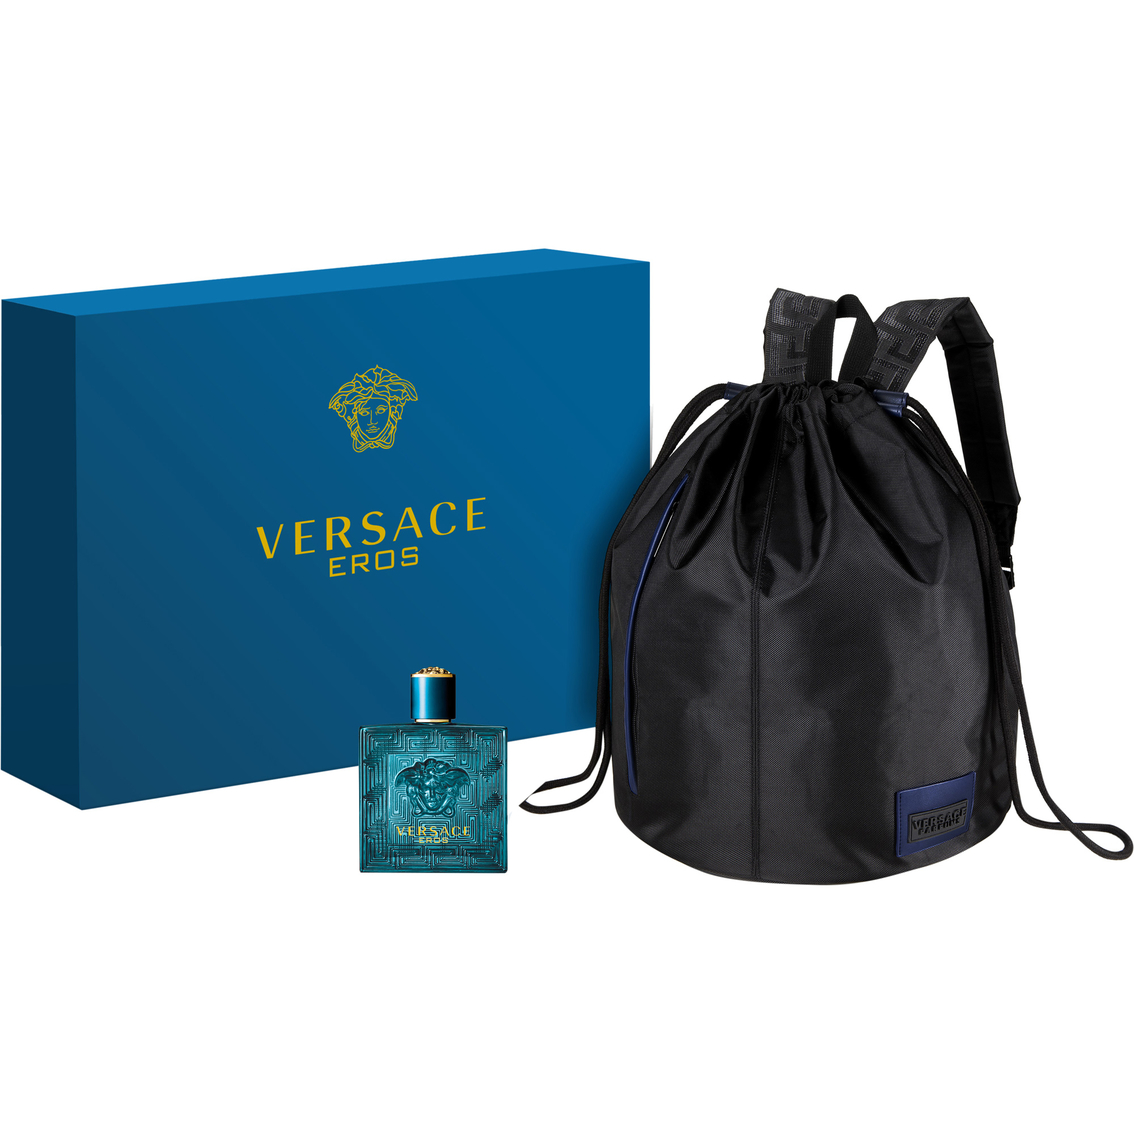 Versace Eros With Men's Backpack | Gift Sets | Beauty & Health | Shop ...